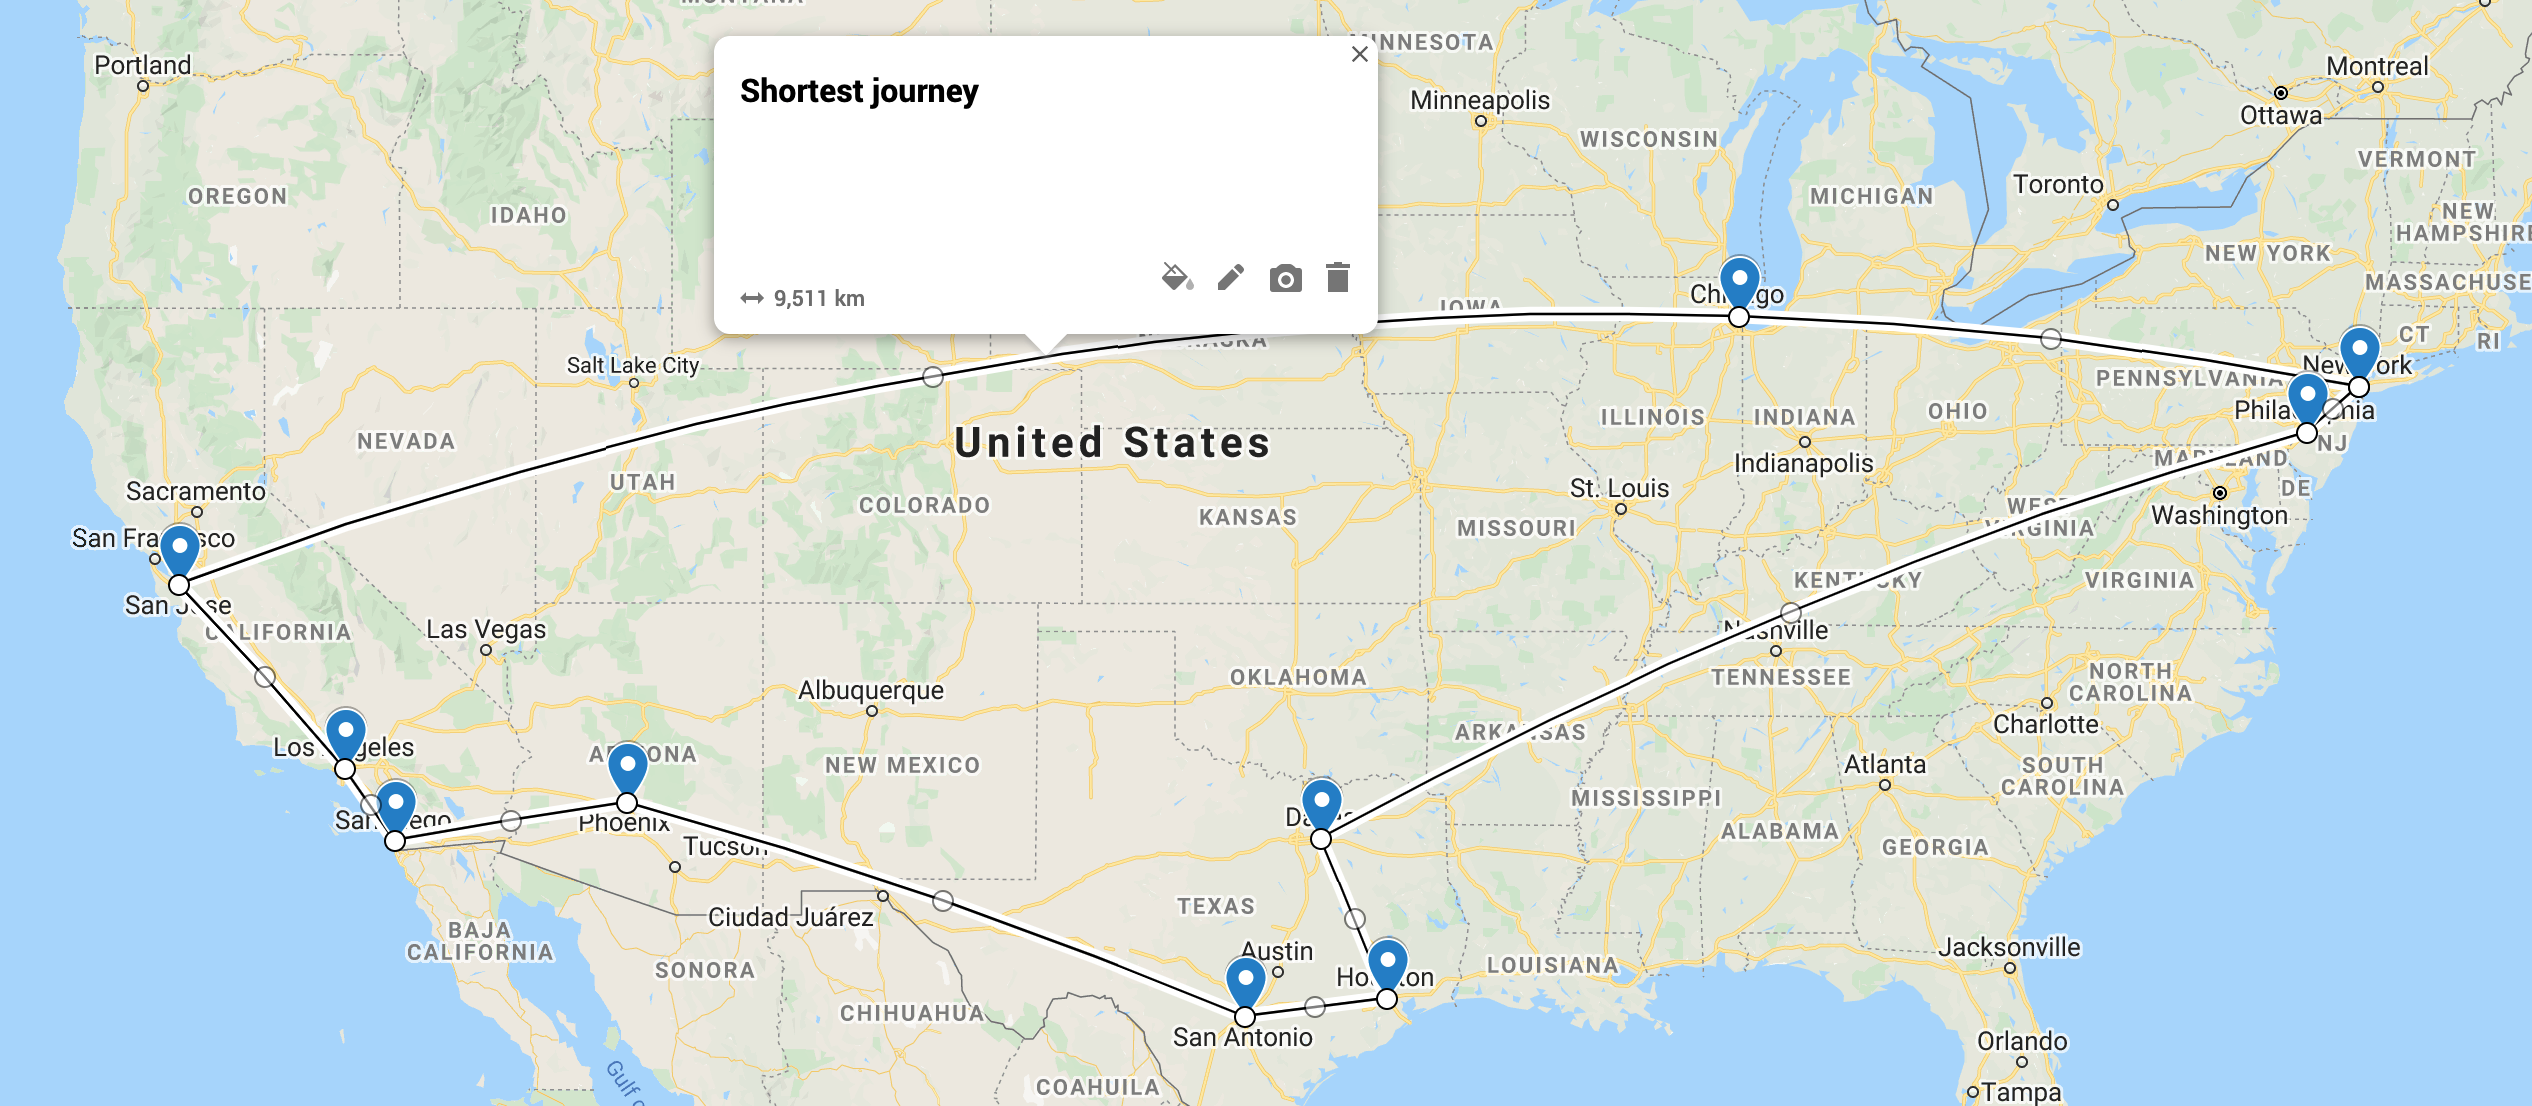 Map of shortest journey around 10 cities in the US